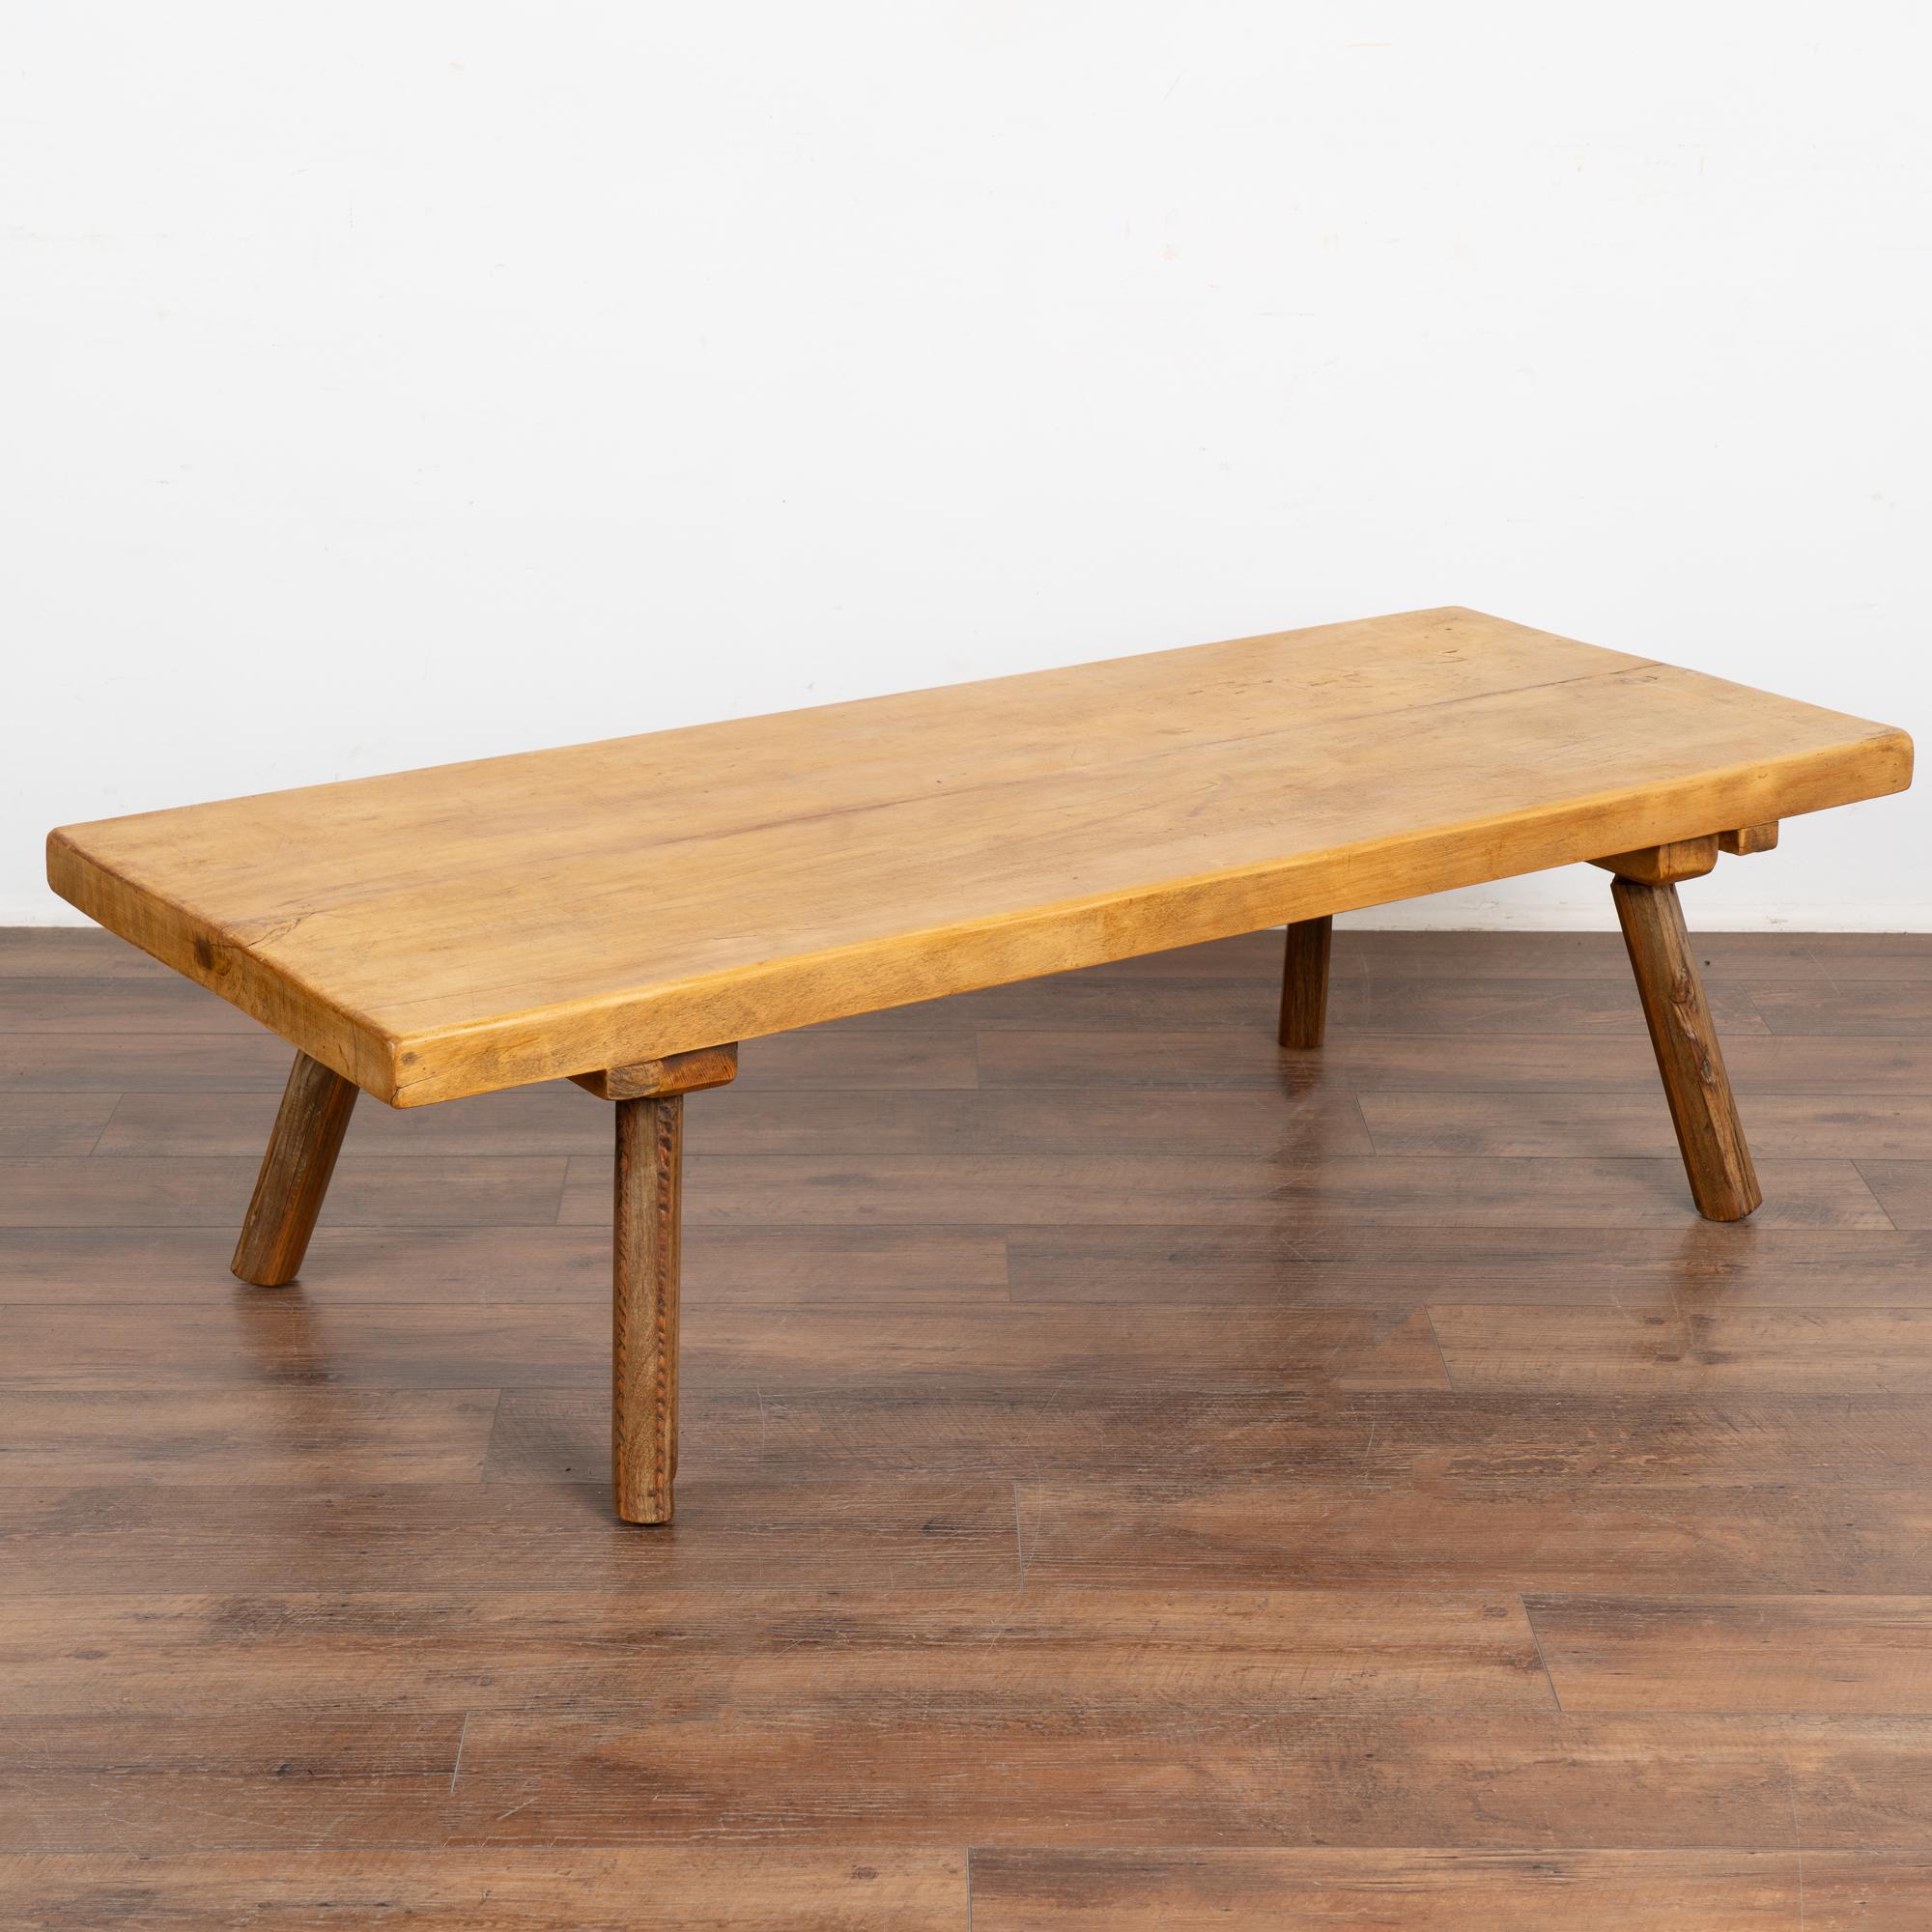 The appeal of this rustic coffee table comes from the thick wood top that originally served as a work table. 
The round peg legs are a contrasting darker color that the top.
Note the scratches, nicks, and even cracks that all combine to build the